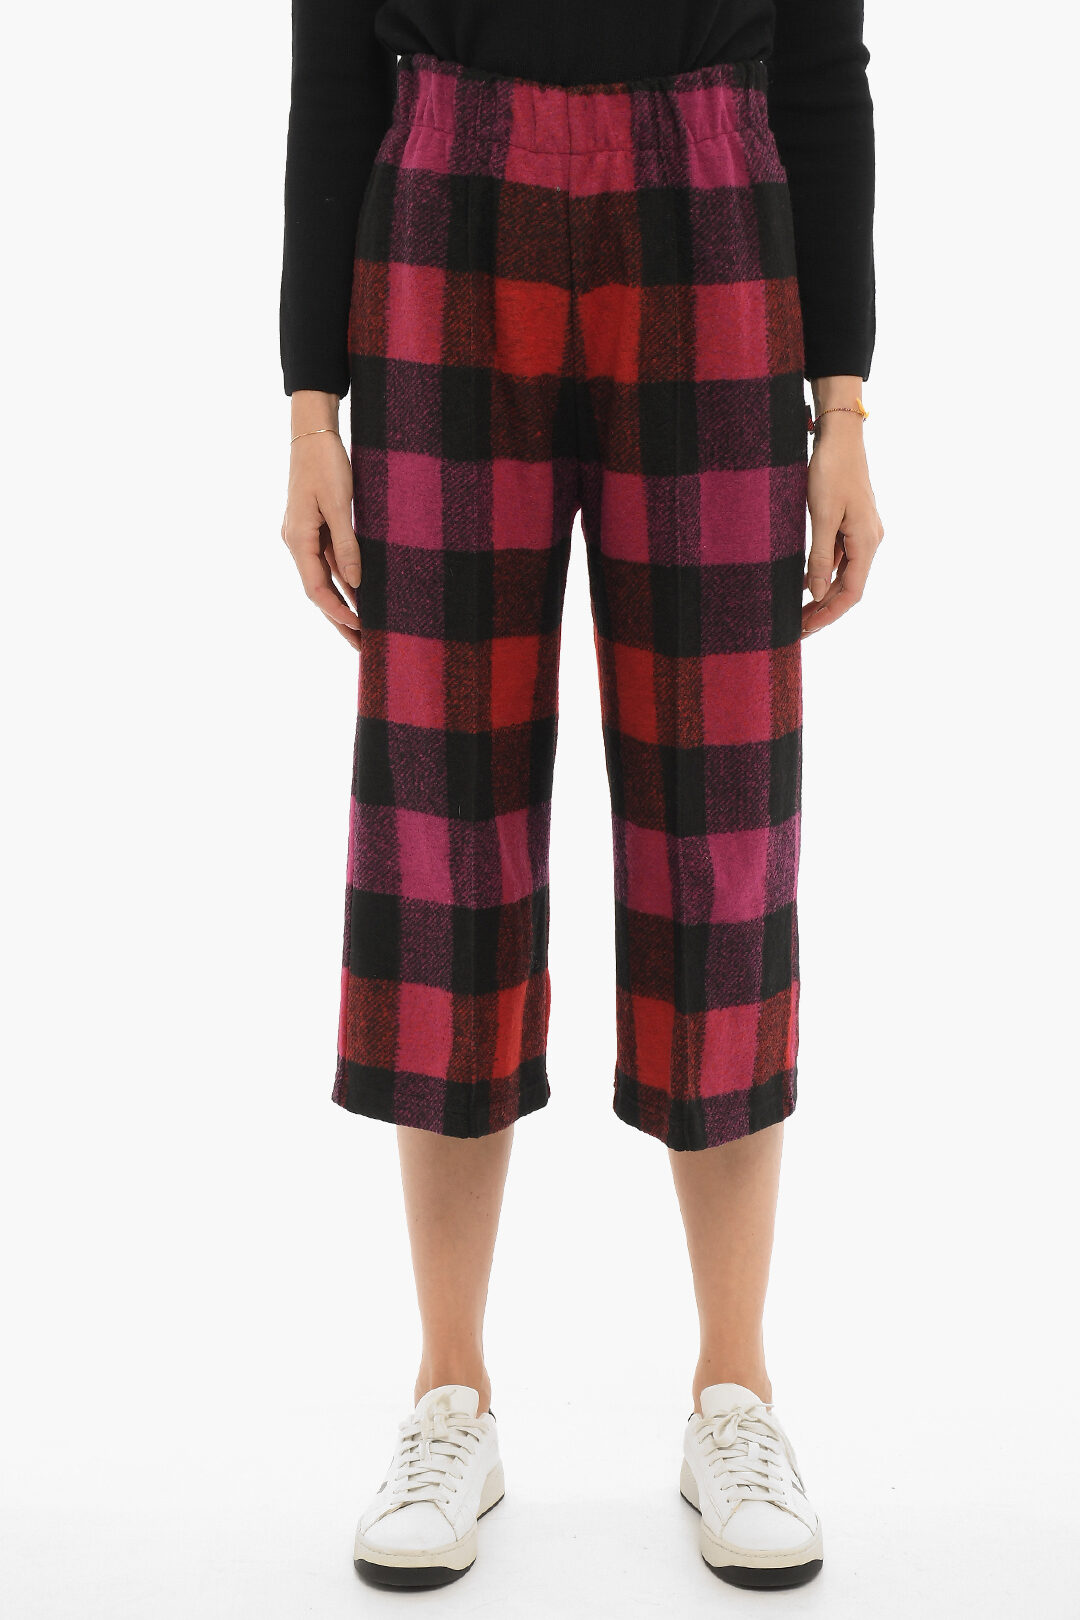 Woolrich Buffalo Checked Gaucho Pants with Drawstring Waist women - Glamood  Outlet